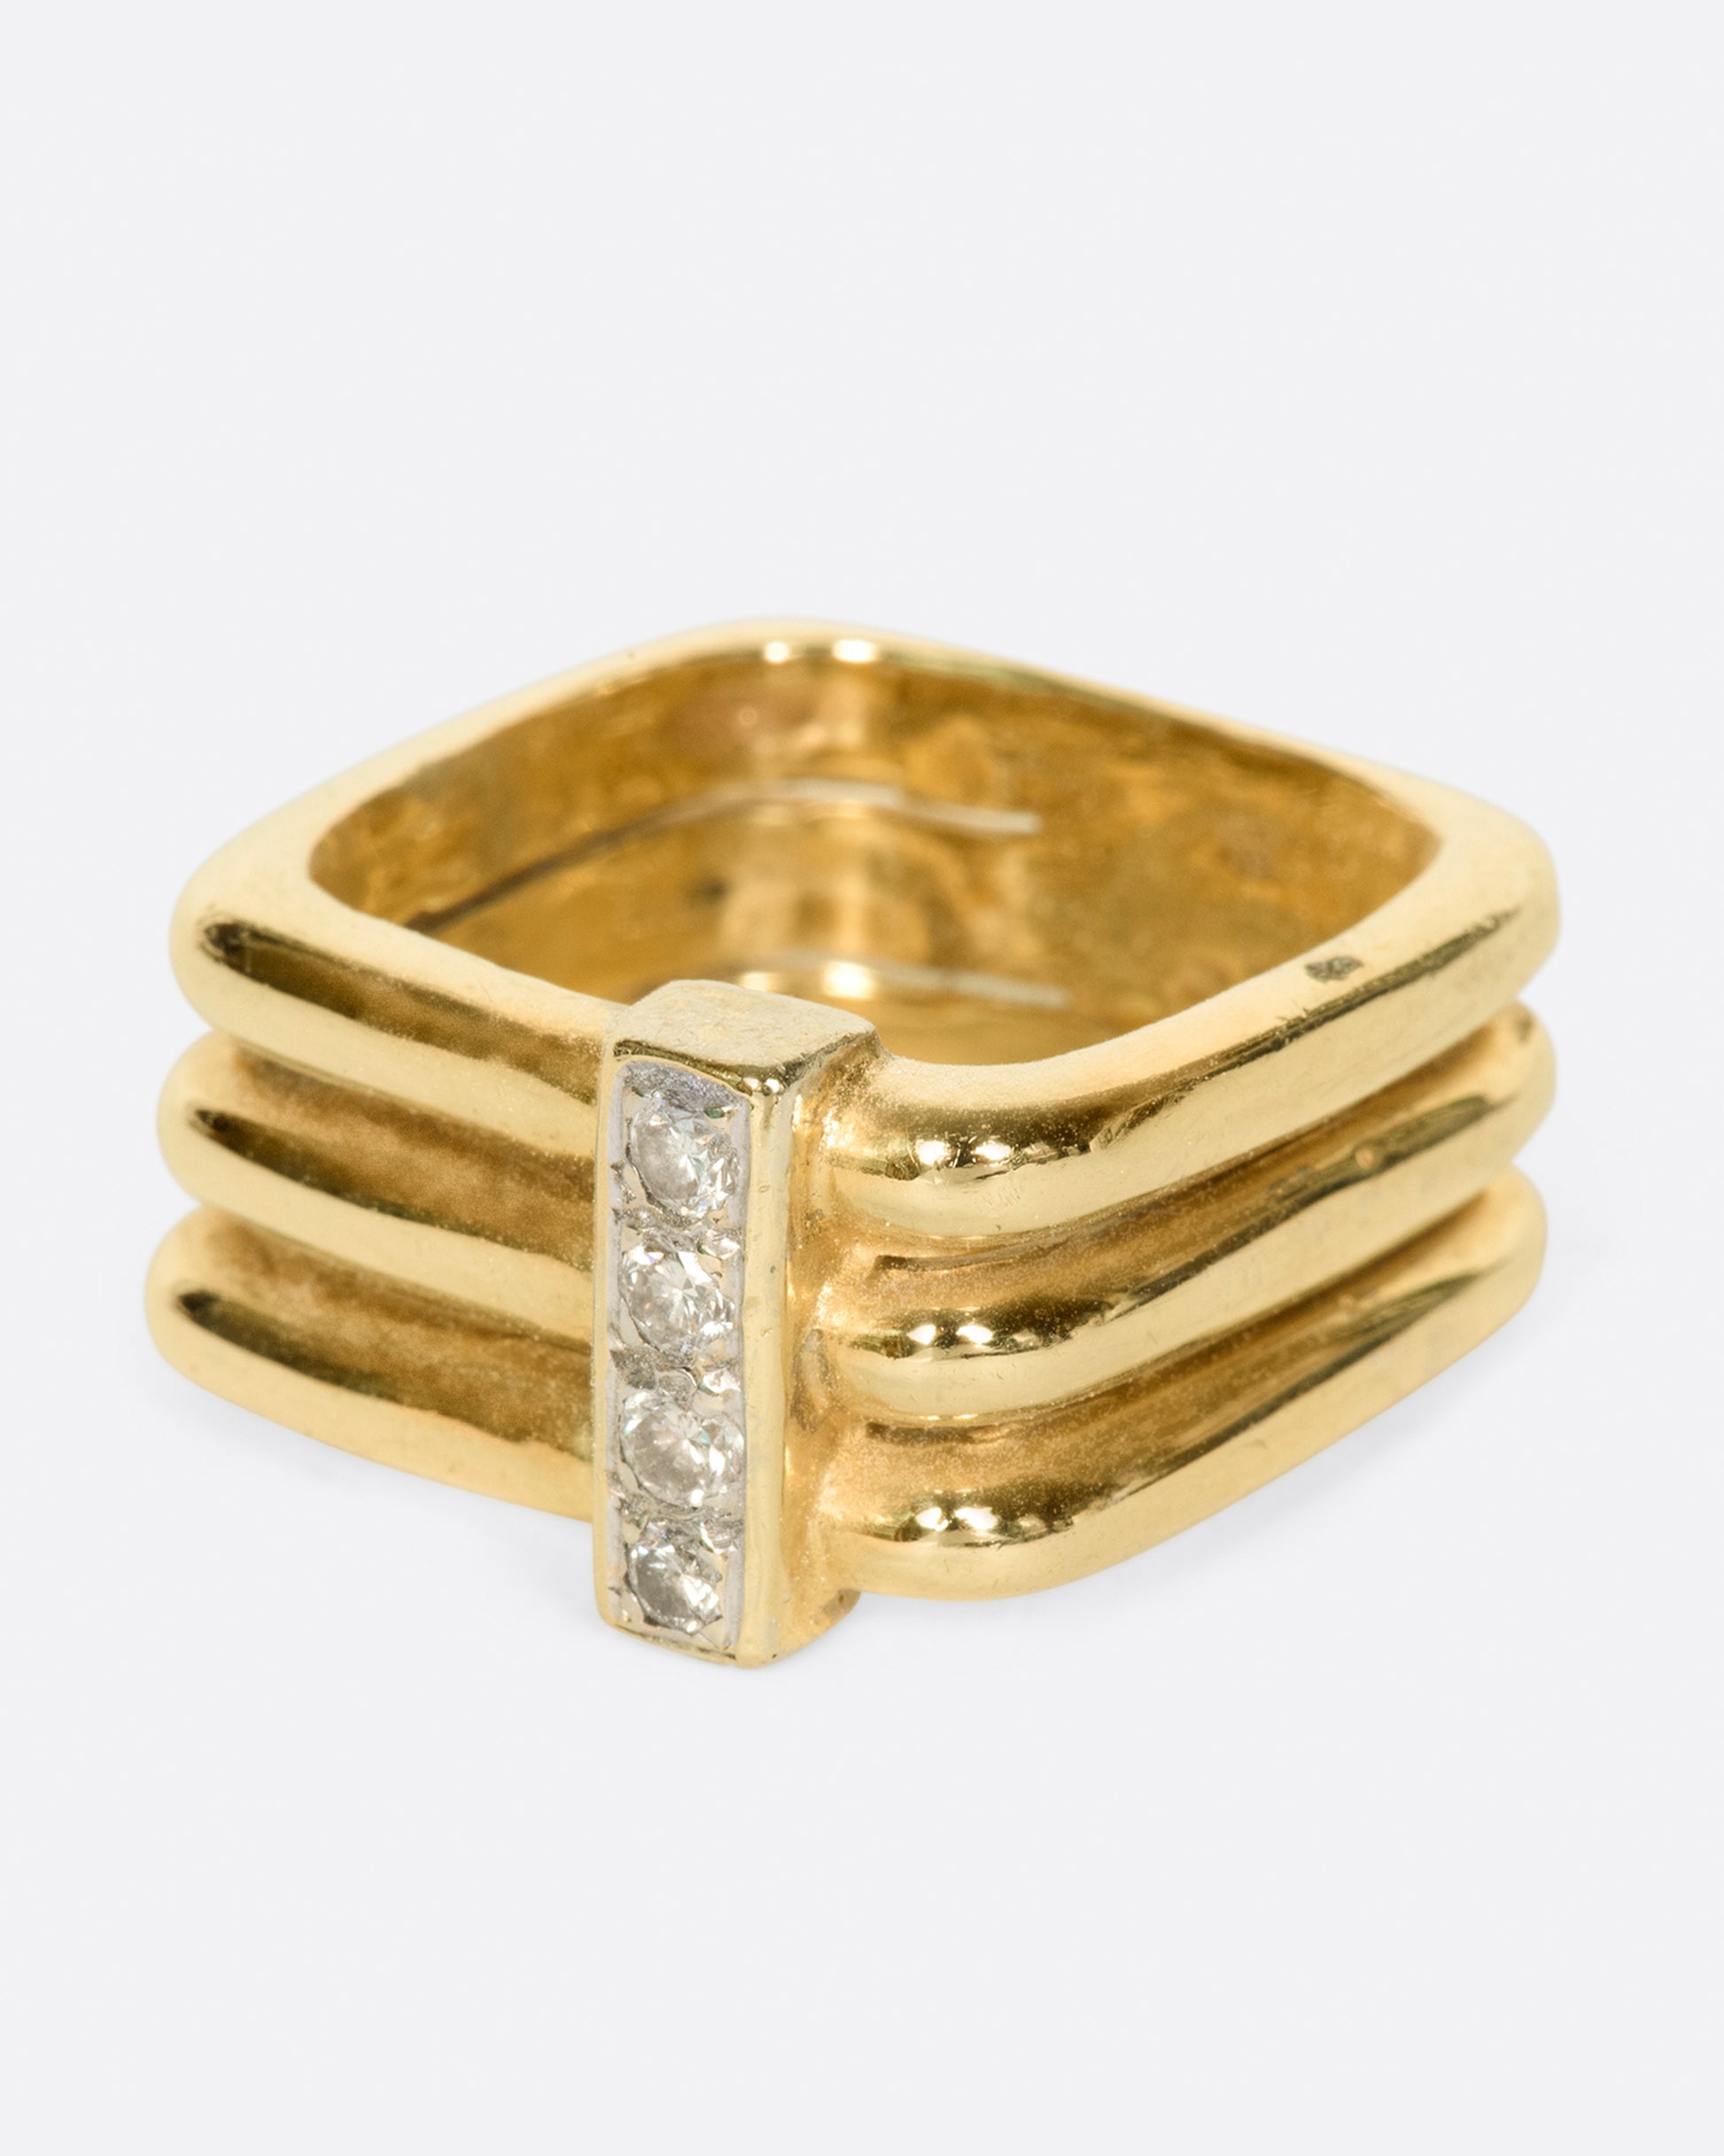 A single band that gives the illusion of a stack, connected with diamonds, shown from the side.